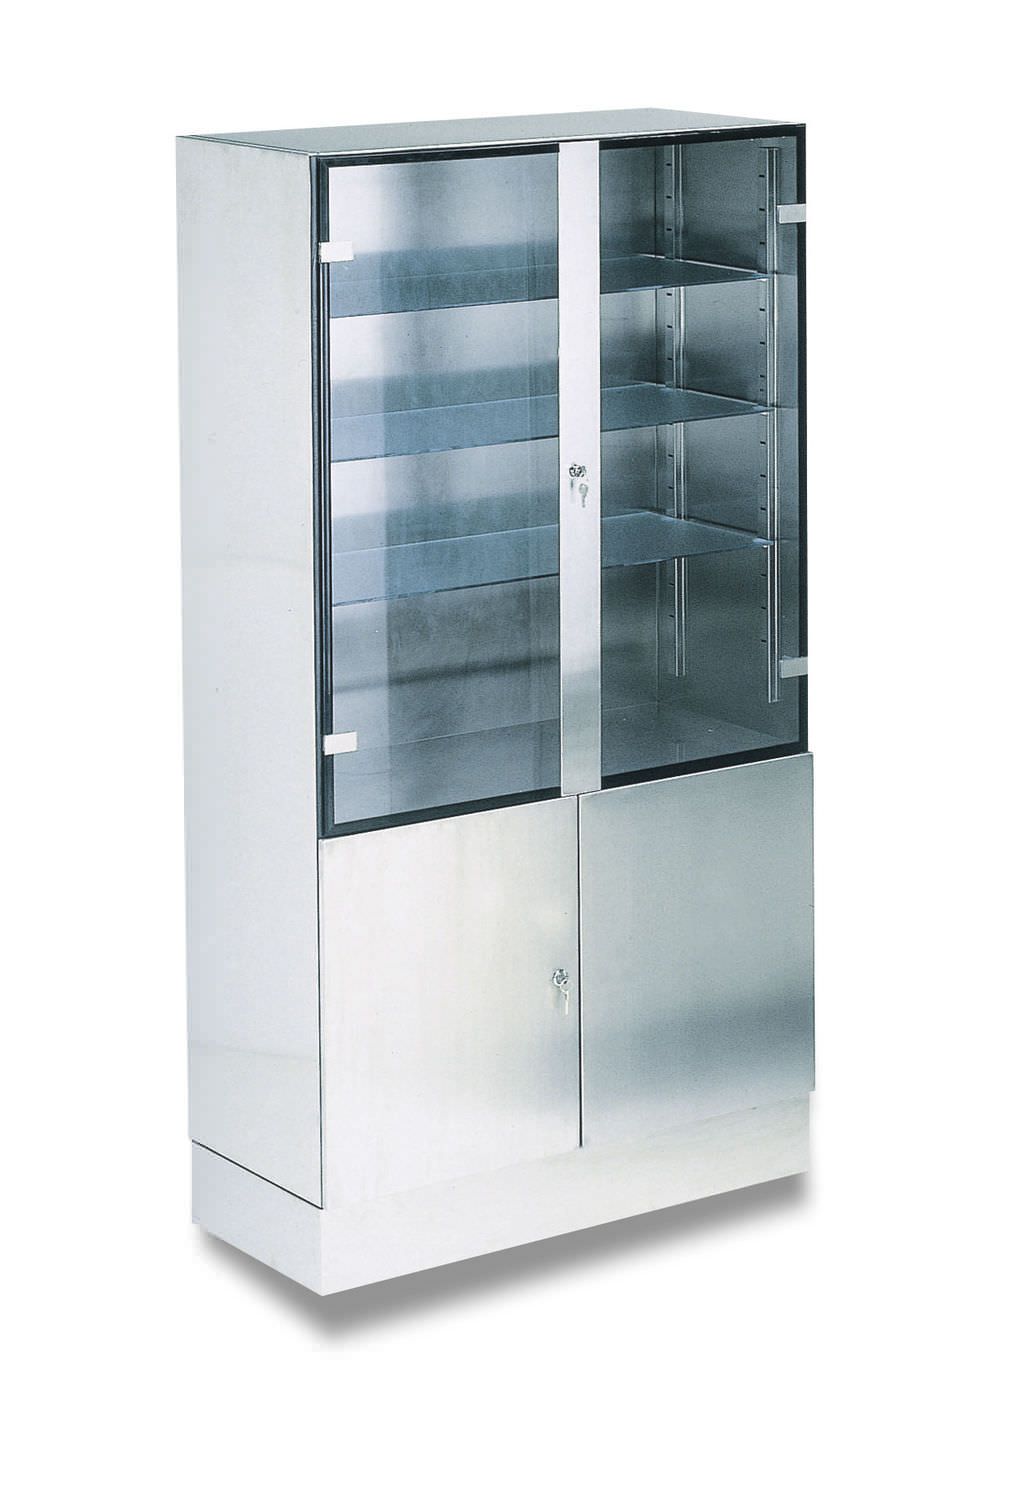 Medical cabinet / operating room / stainless steel galeno_1201-A PICOMED